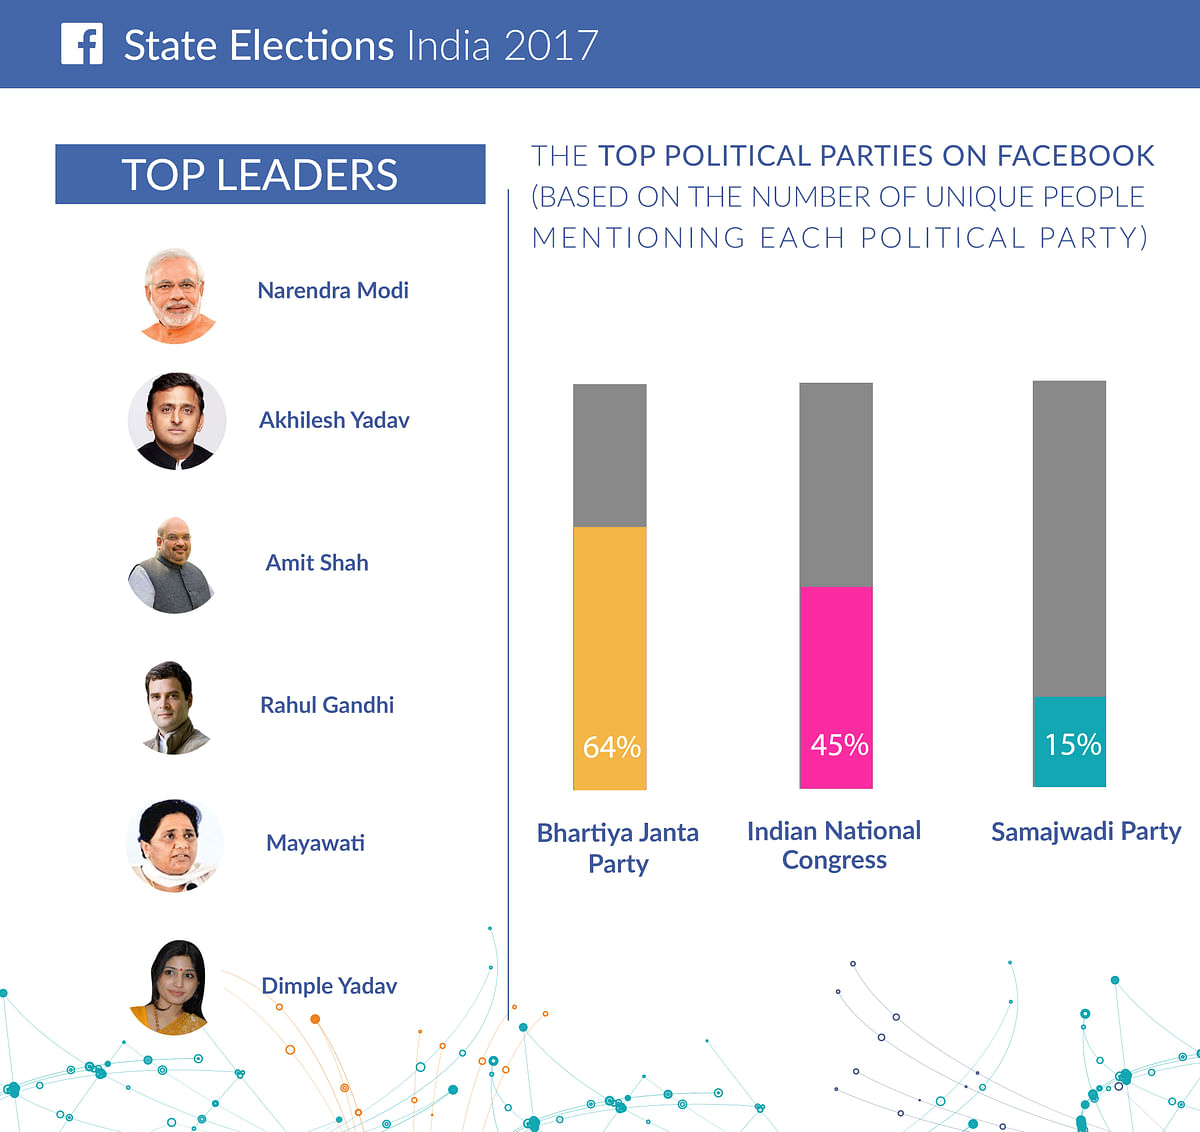 Not surprisingly, PM Modi is the most popular Indian political leader on Facebook, with 40 million likes on his page